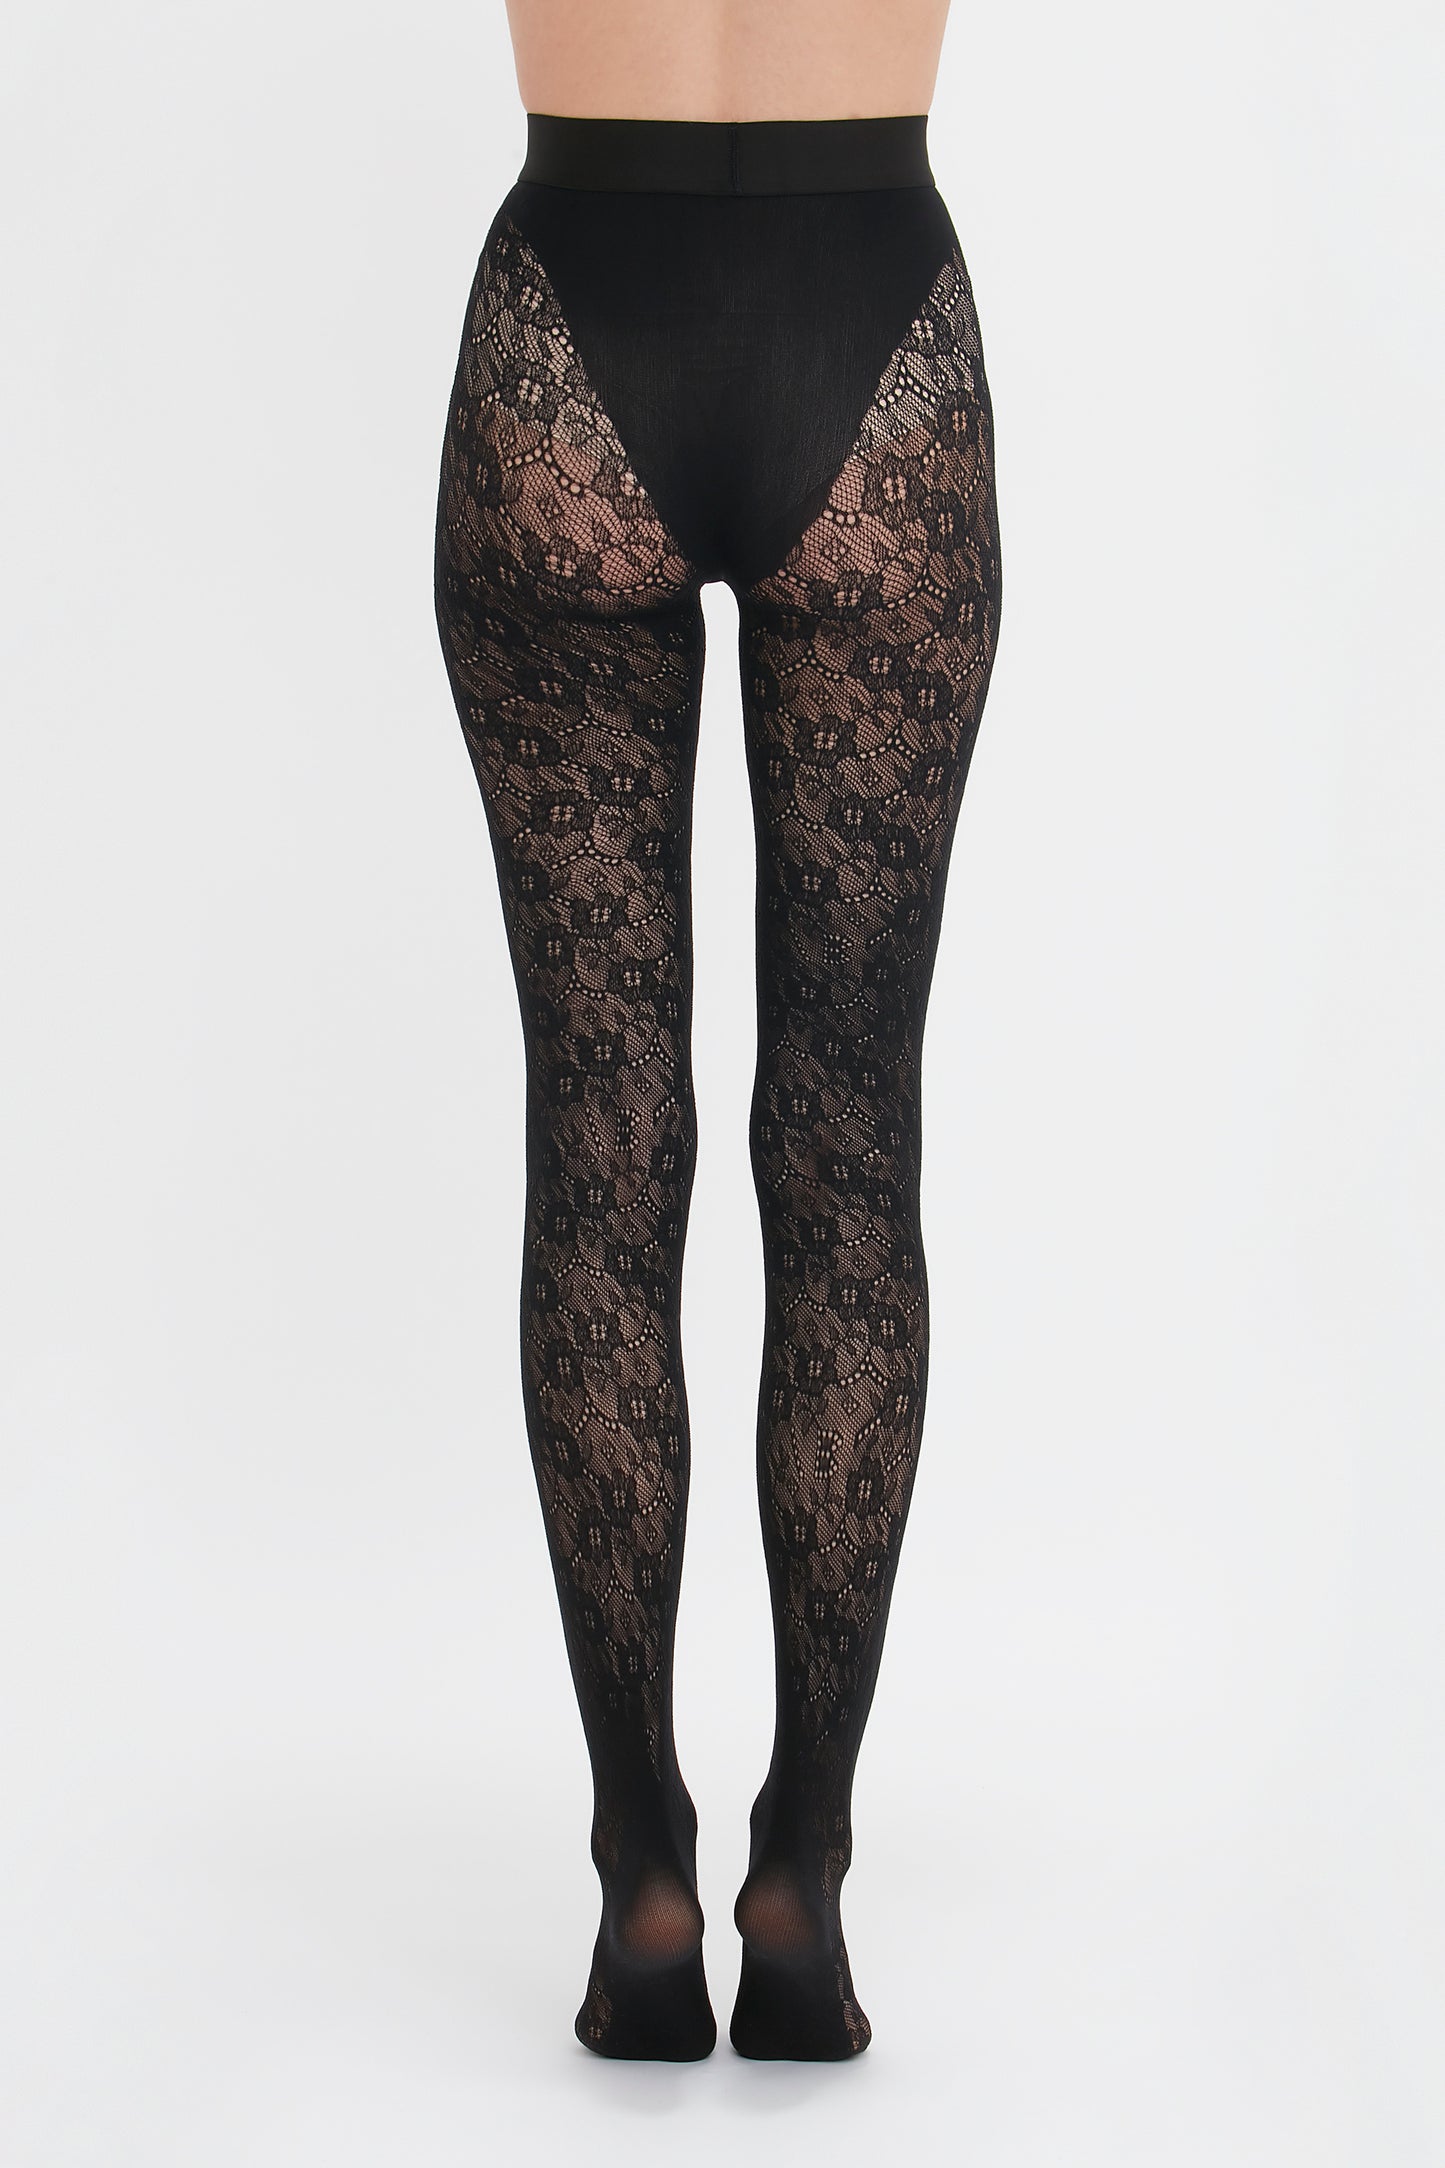 Lace Tights from Tights Tights Tights